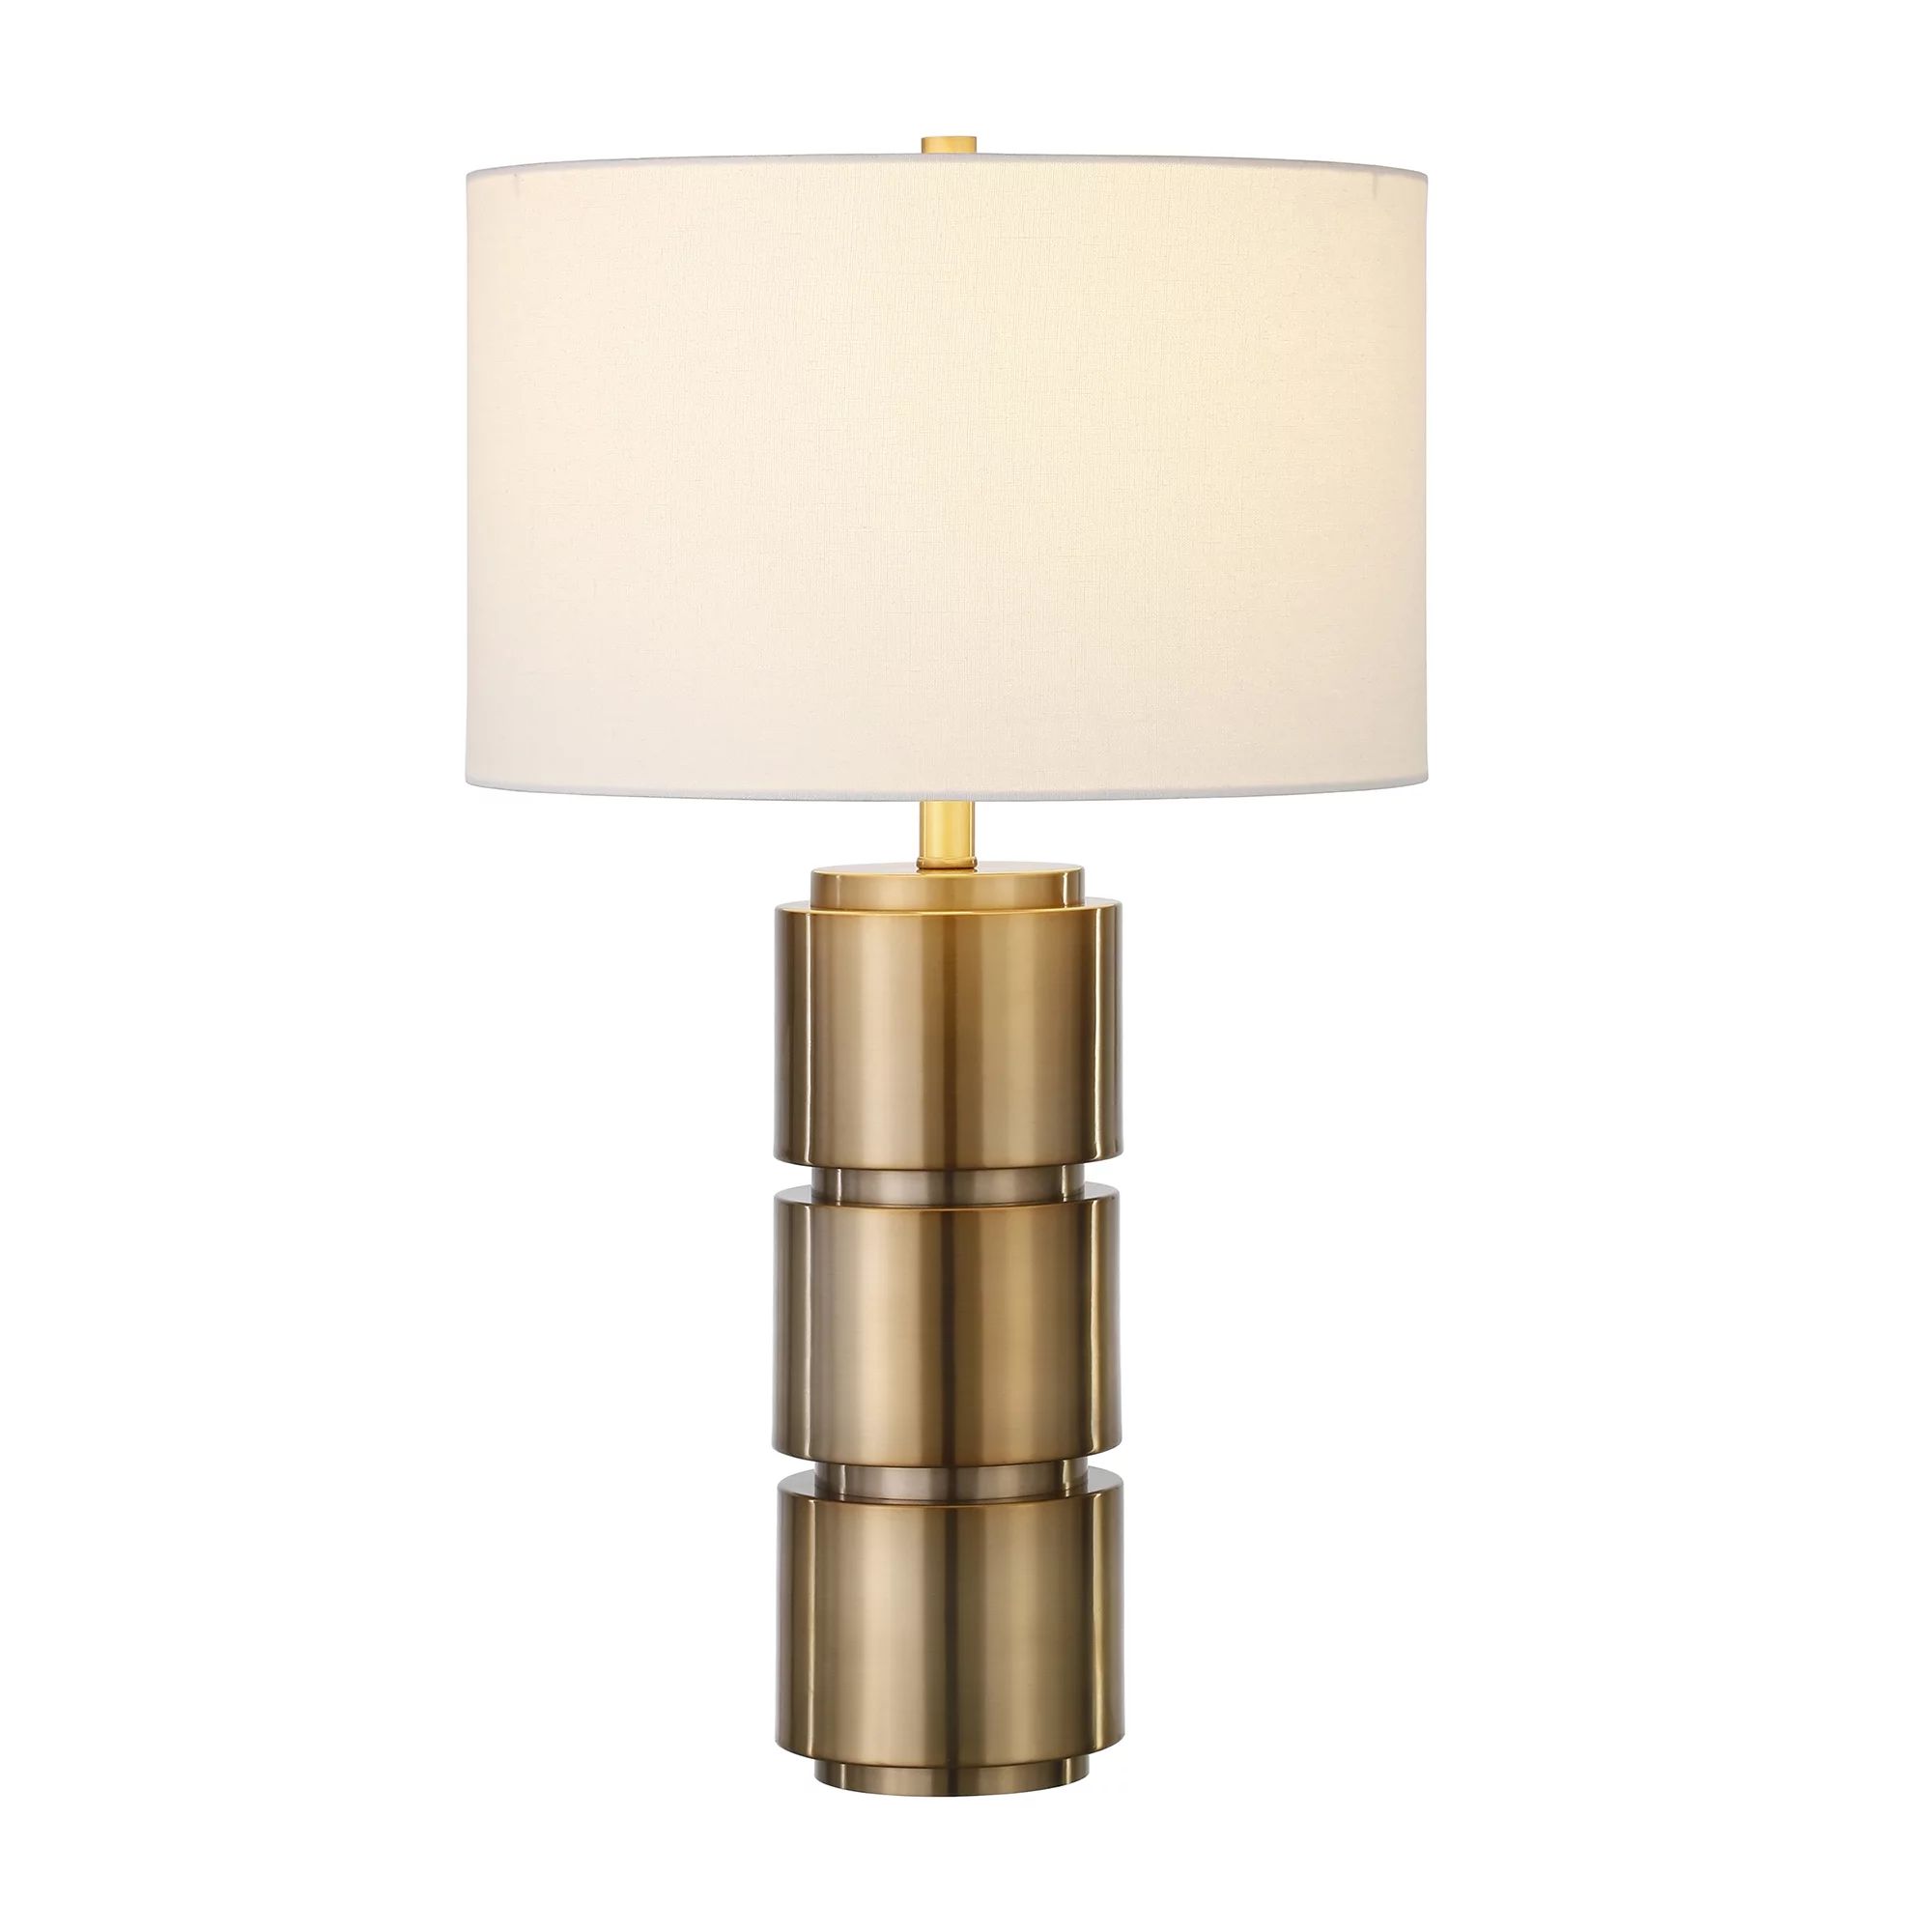 Evelyn&Zoe Campbell Mid Century Modern Stacked Metal Table Lamp, Brass | Walmart (US)